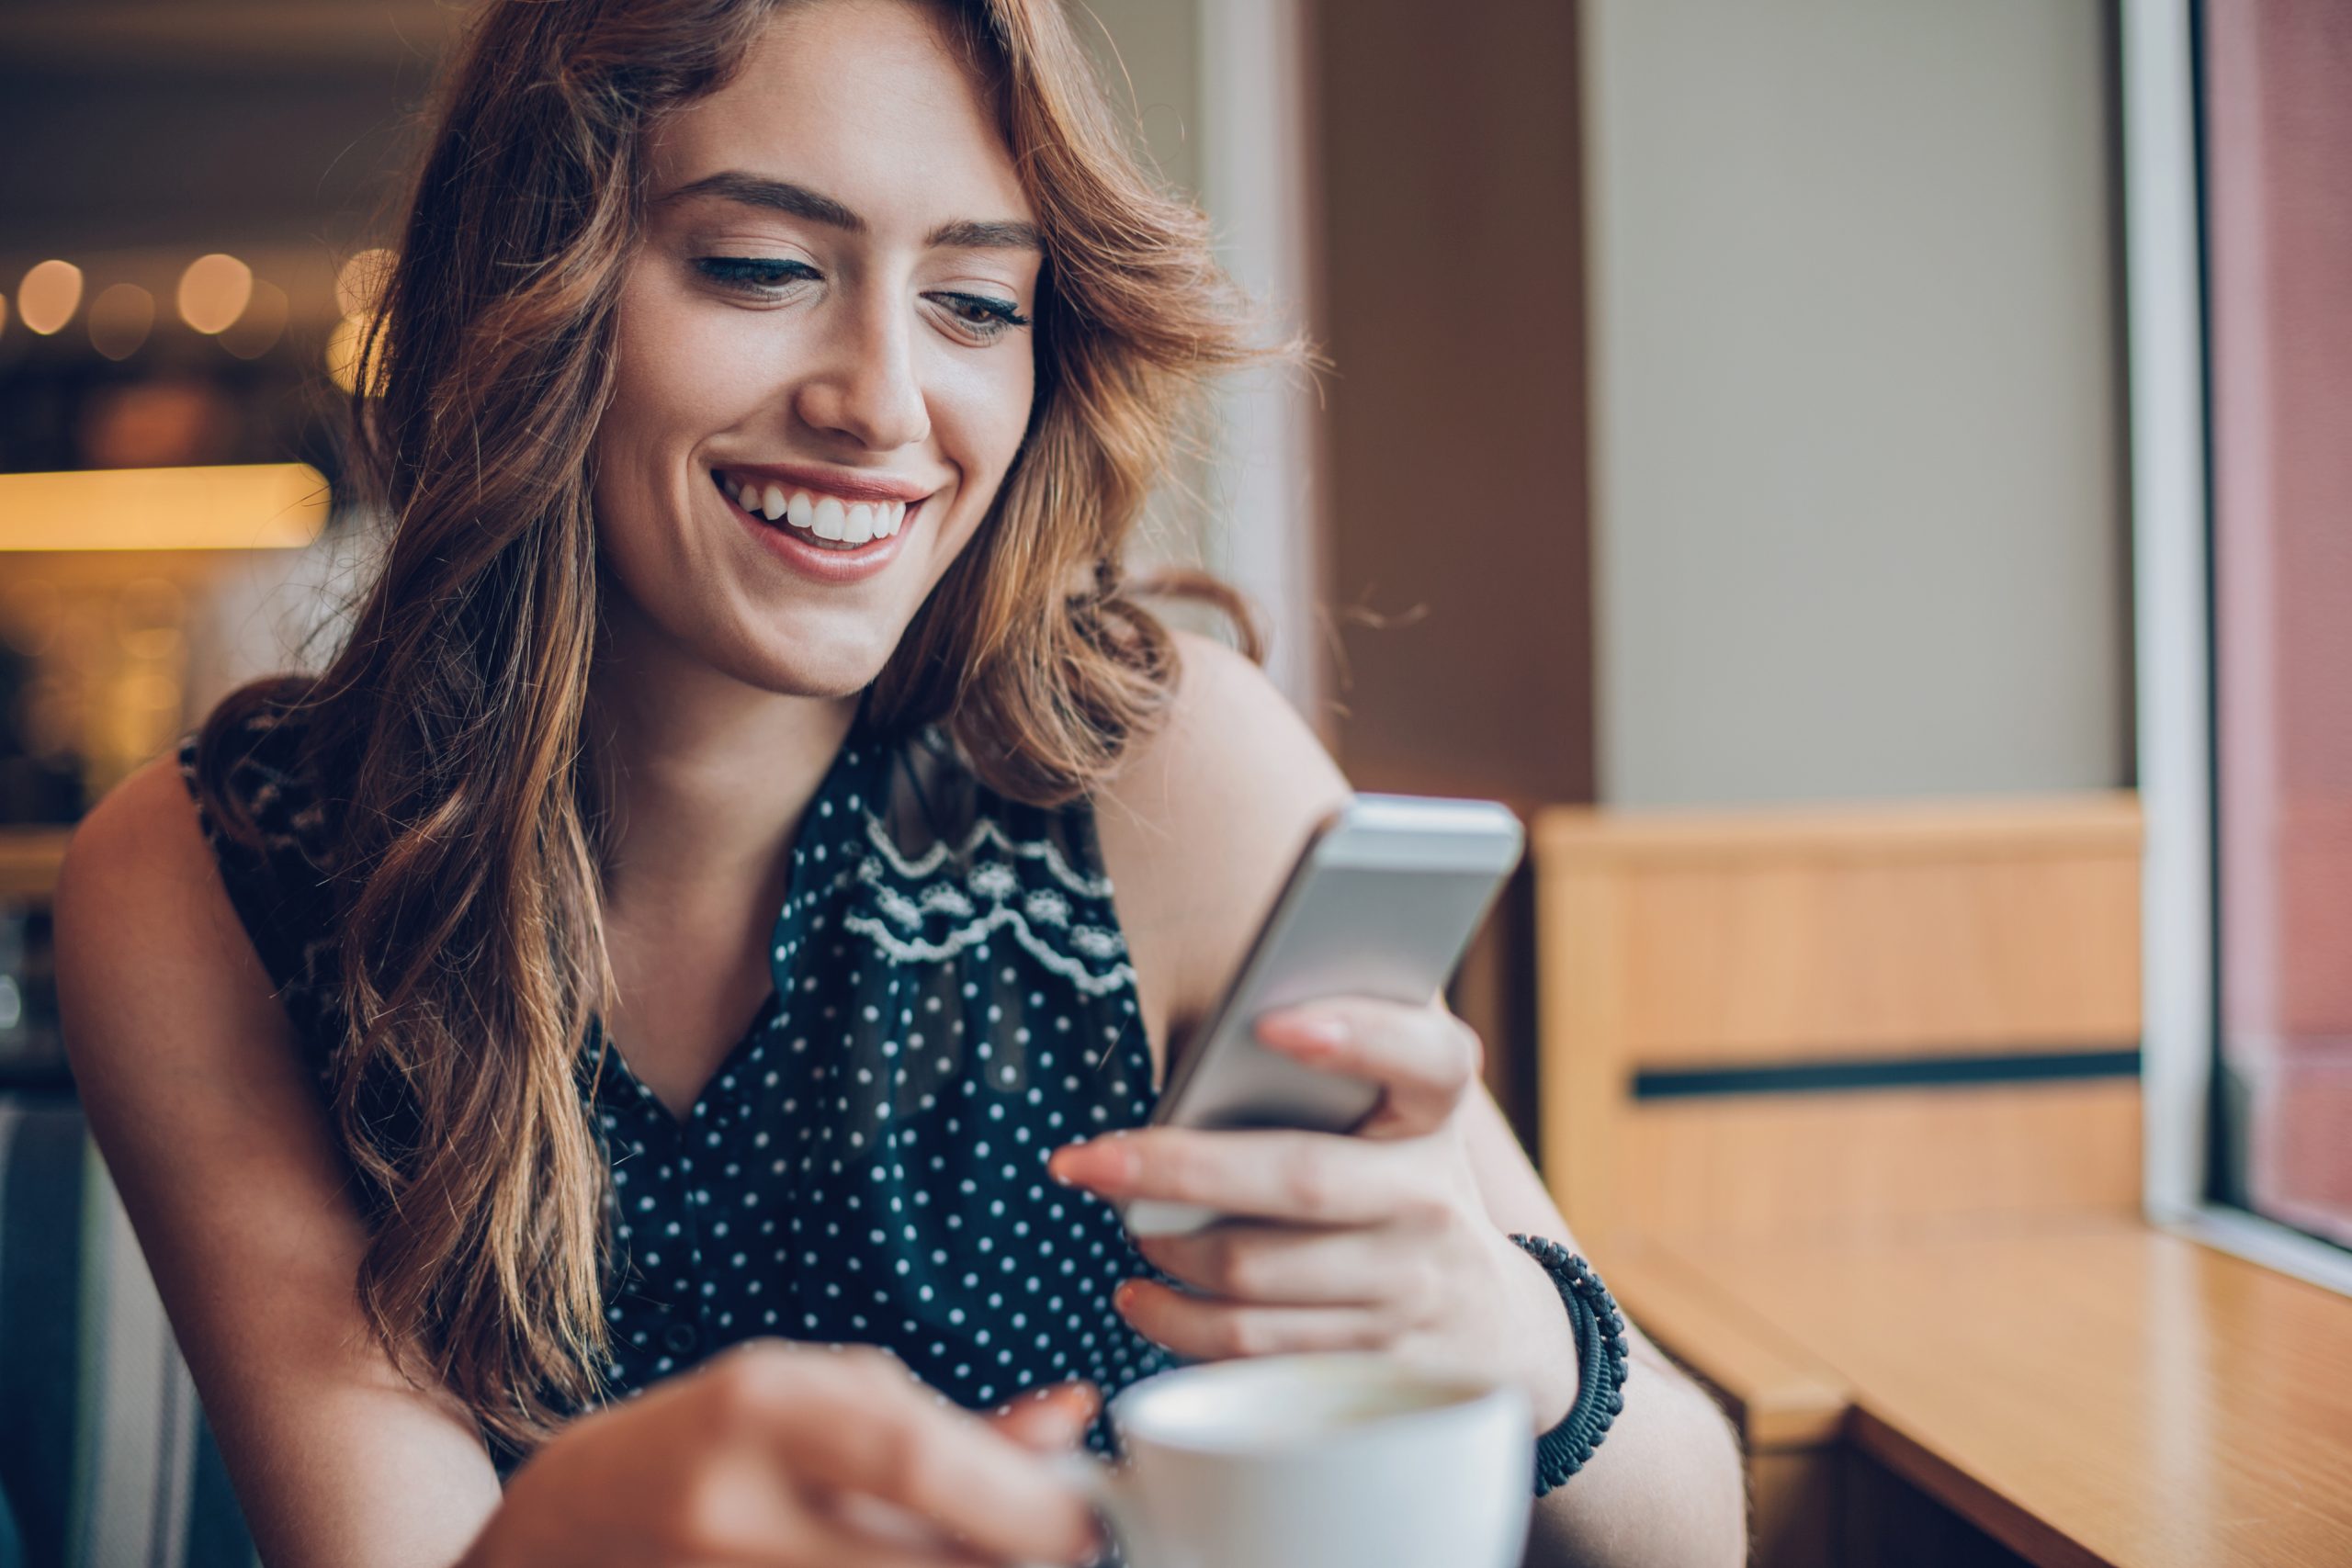 Woman smiling into phone while texting with conversational customer engagement